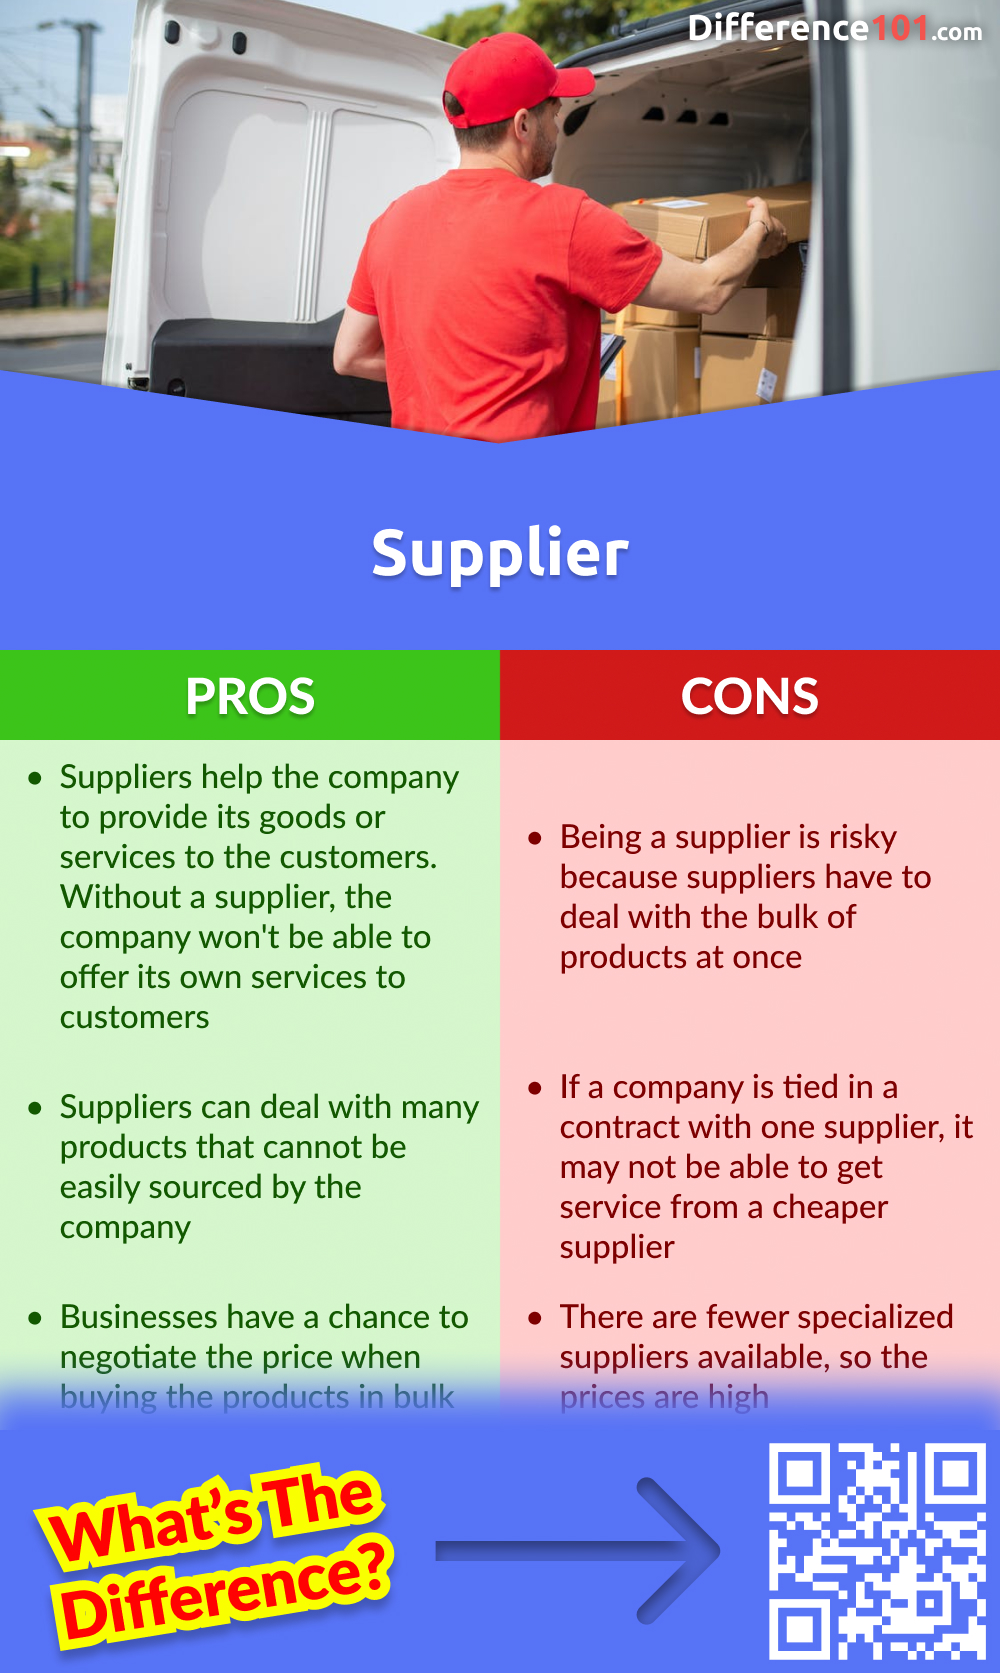 Supplier Pros and Cons